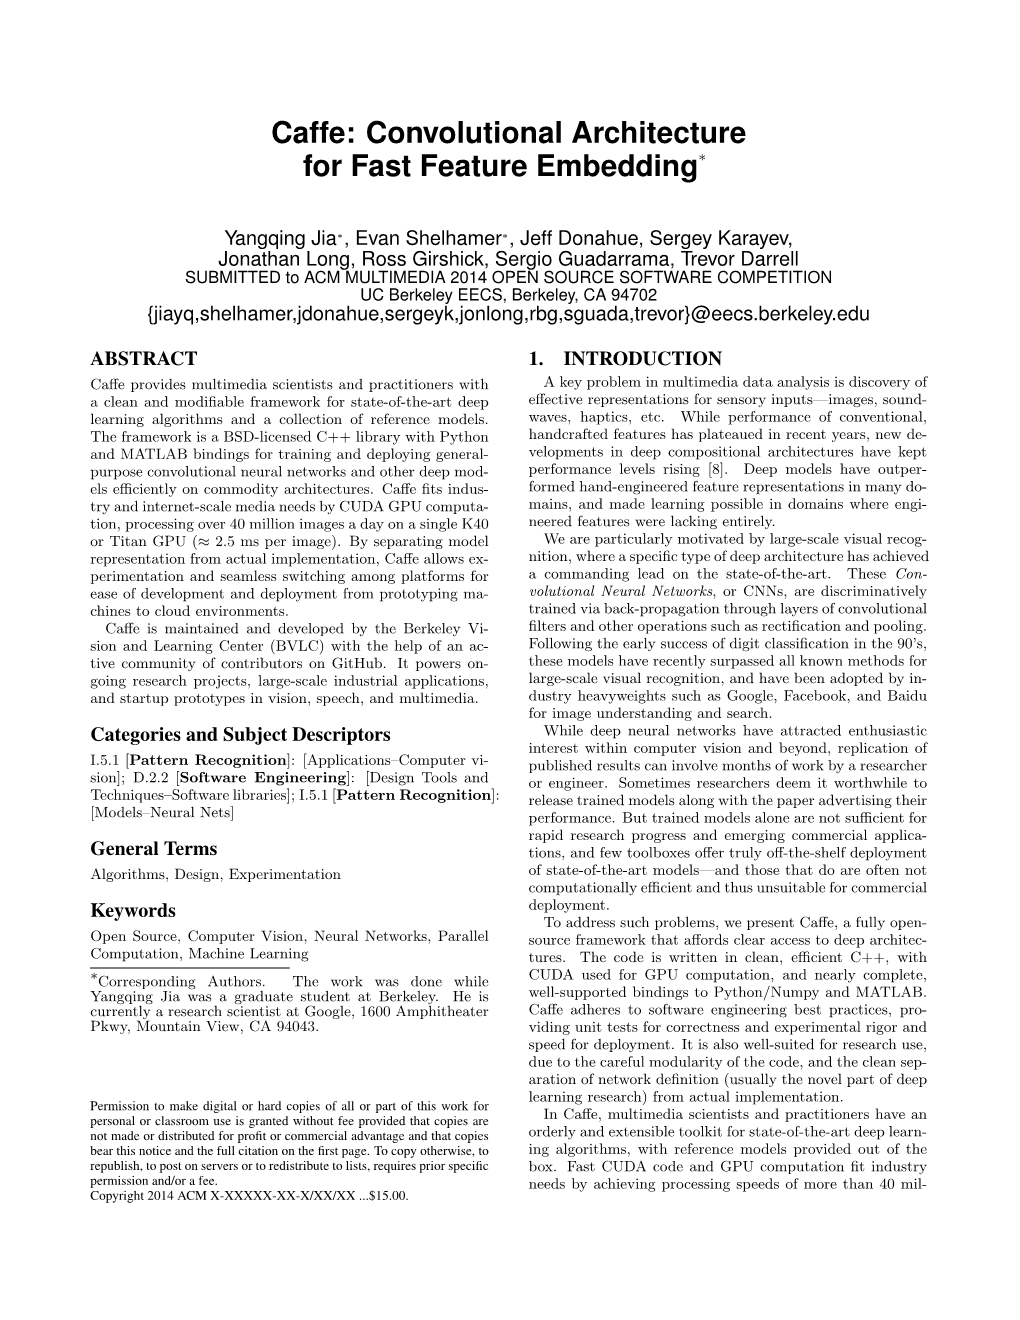 Caffe: Convolutional Architecture for Fast Feature Embedding∗